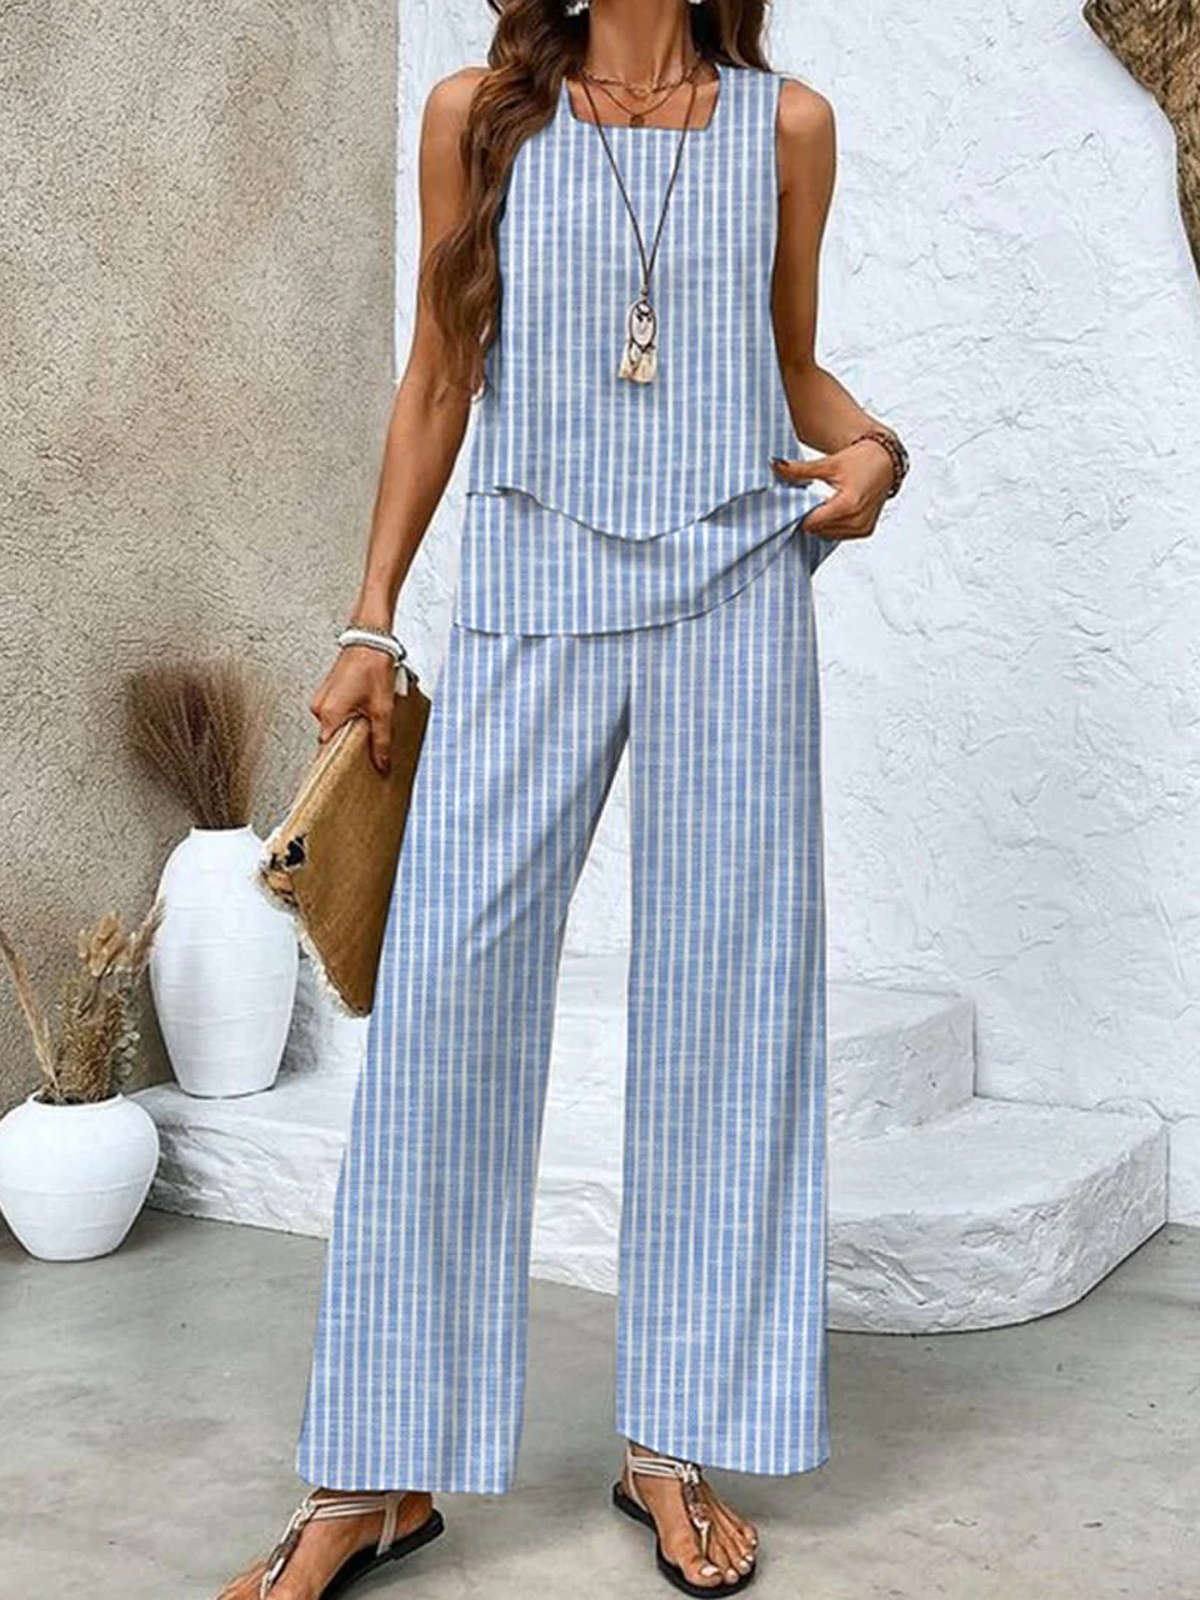 Women Striped Square Neck Sleeveless Comfy Casual Top With Pants Two-Piece Set